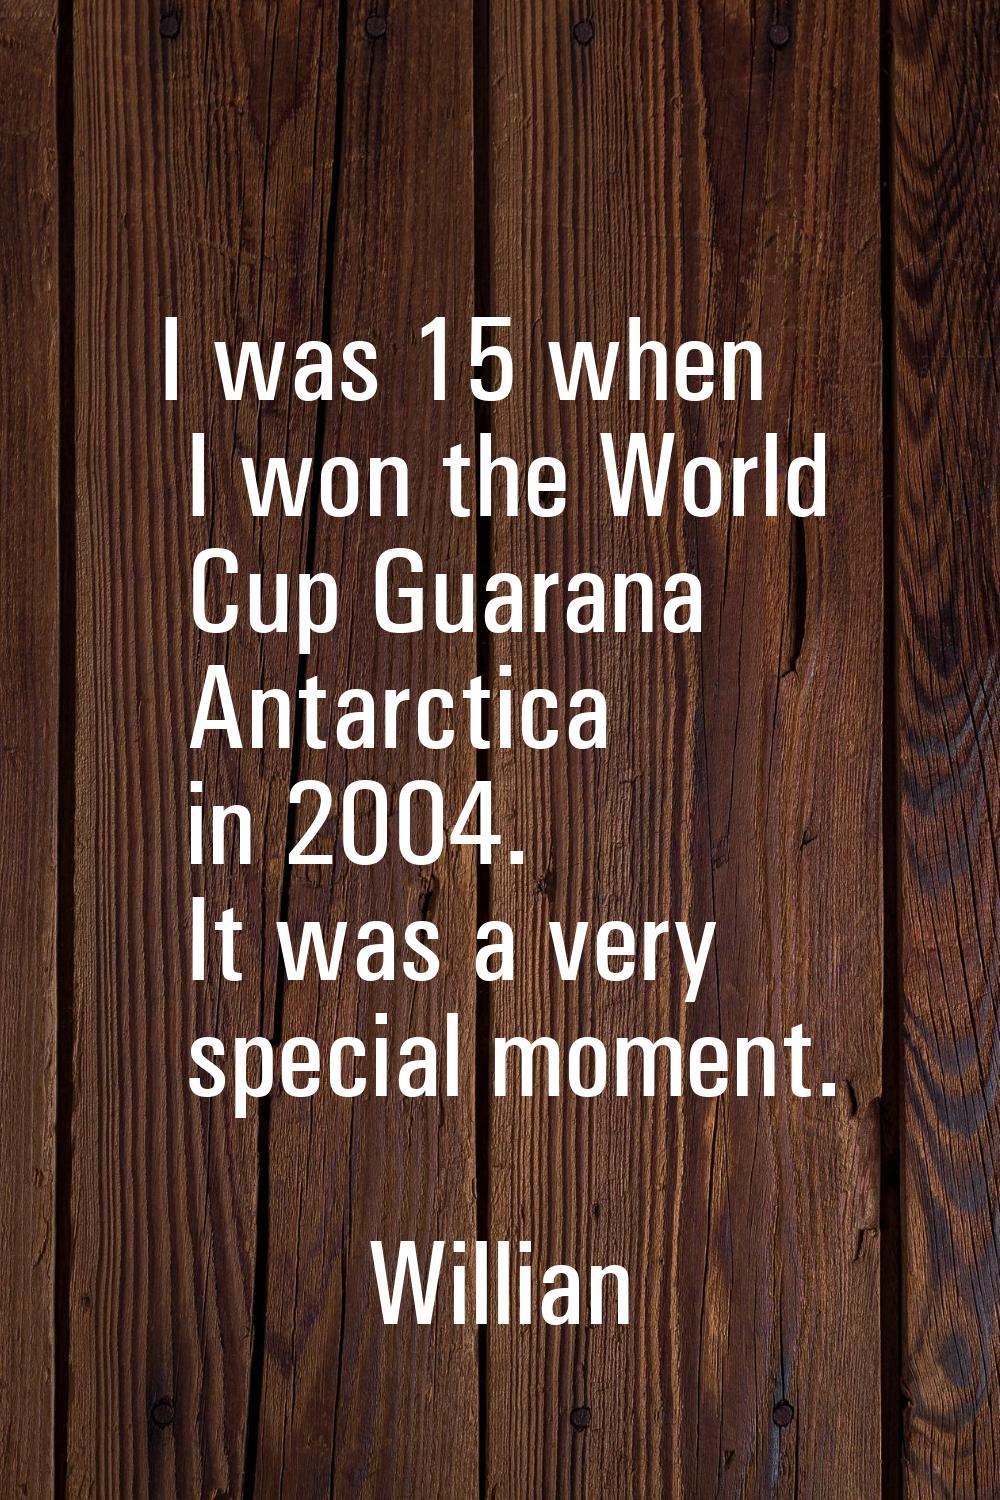 I was 15 when I won the World Cup Guarana Antarctica in 2004. It was a very special moment.